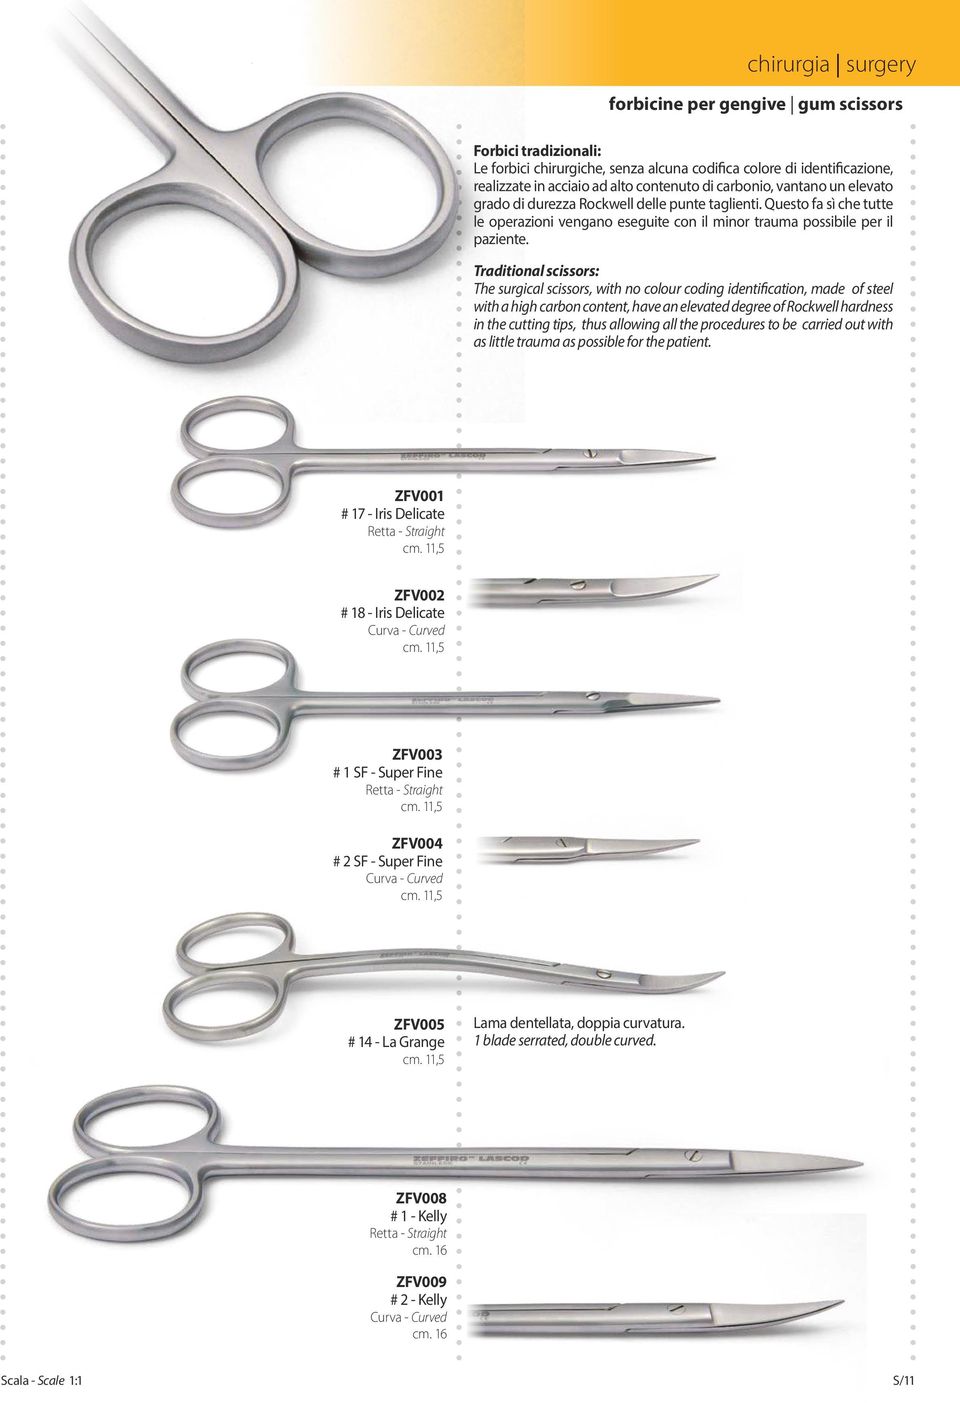 Traditional scissors: The surgical scissors, with no colour coding identification, made of steel with a high carbon content, have an elevated degree of Rockwell hardness in the cutting tips, thus